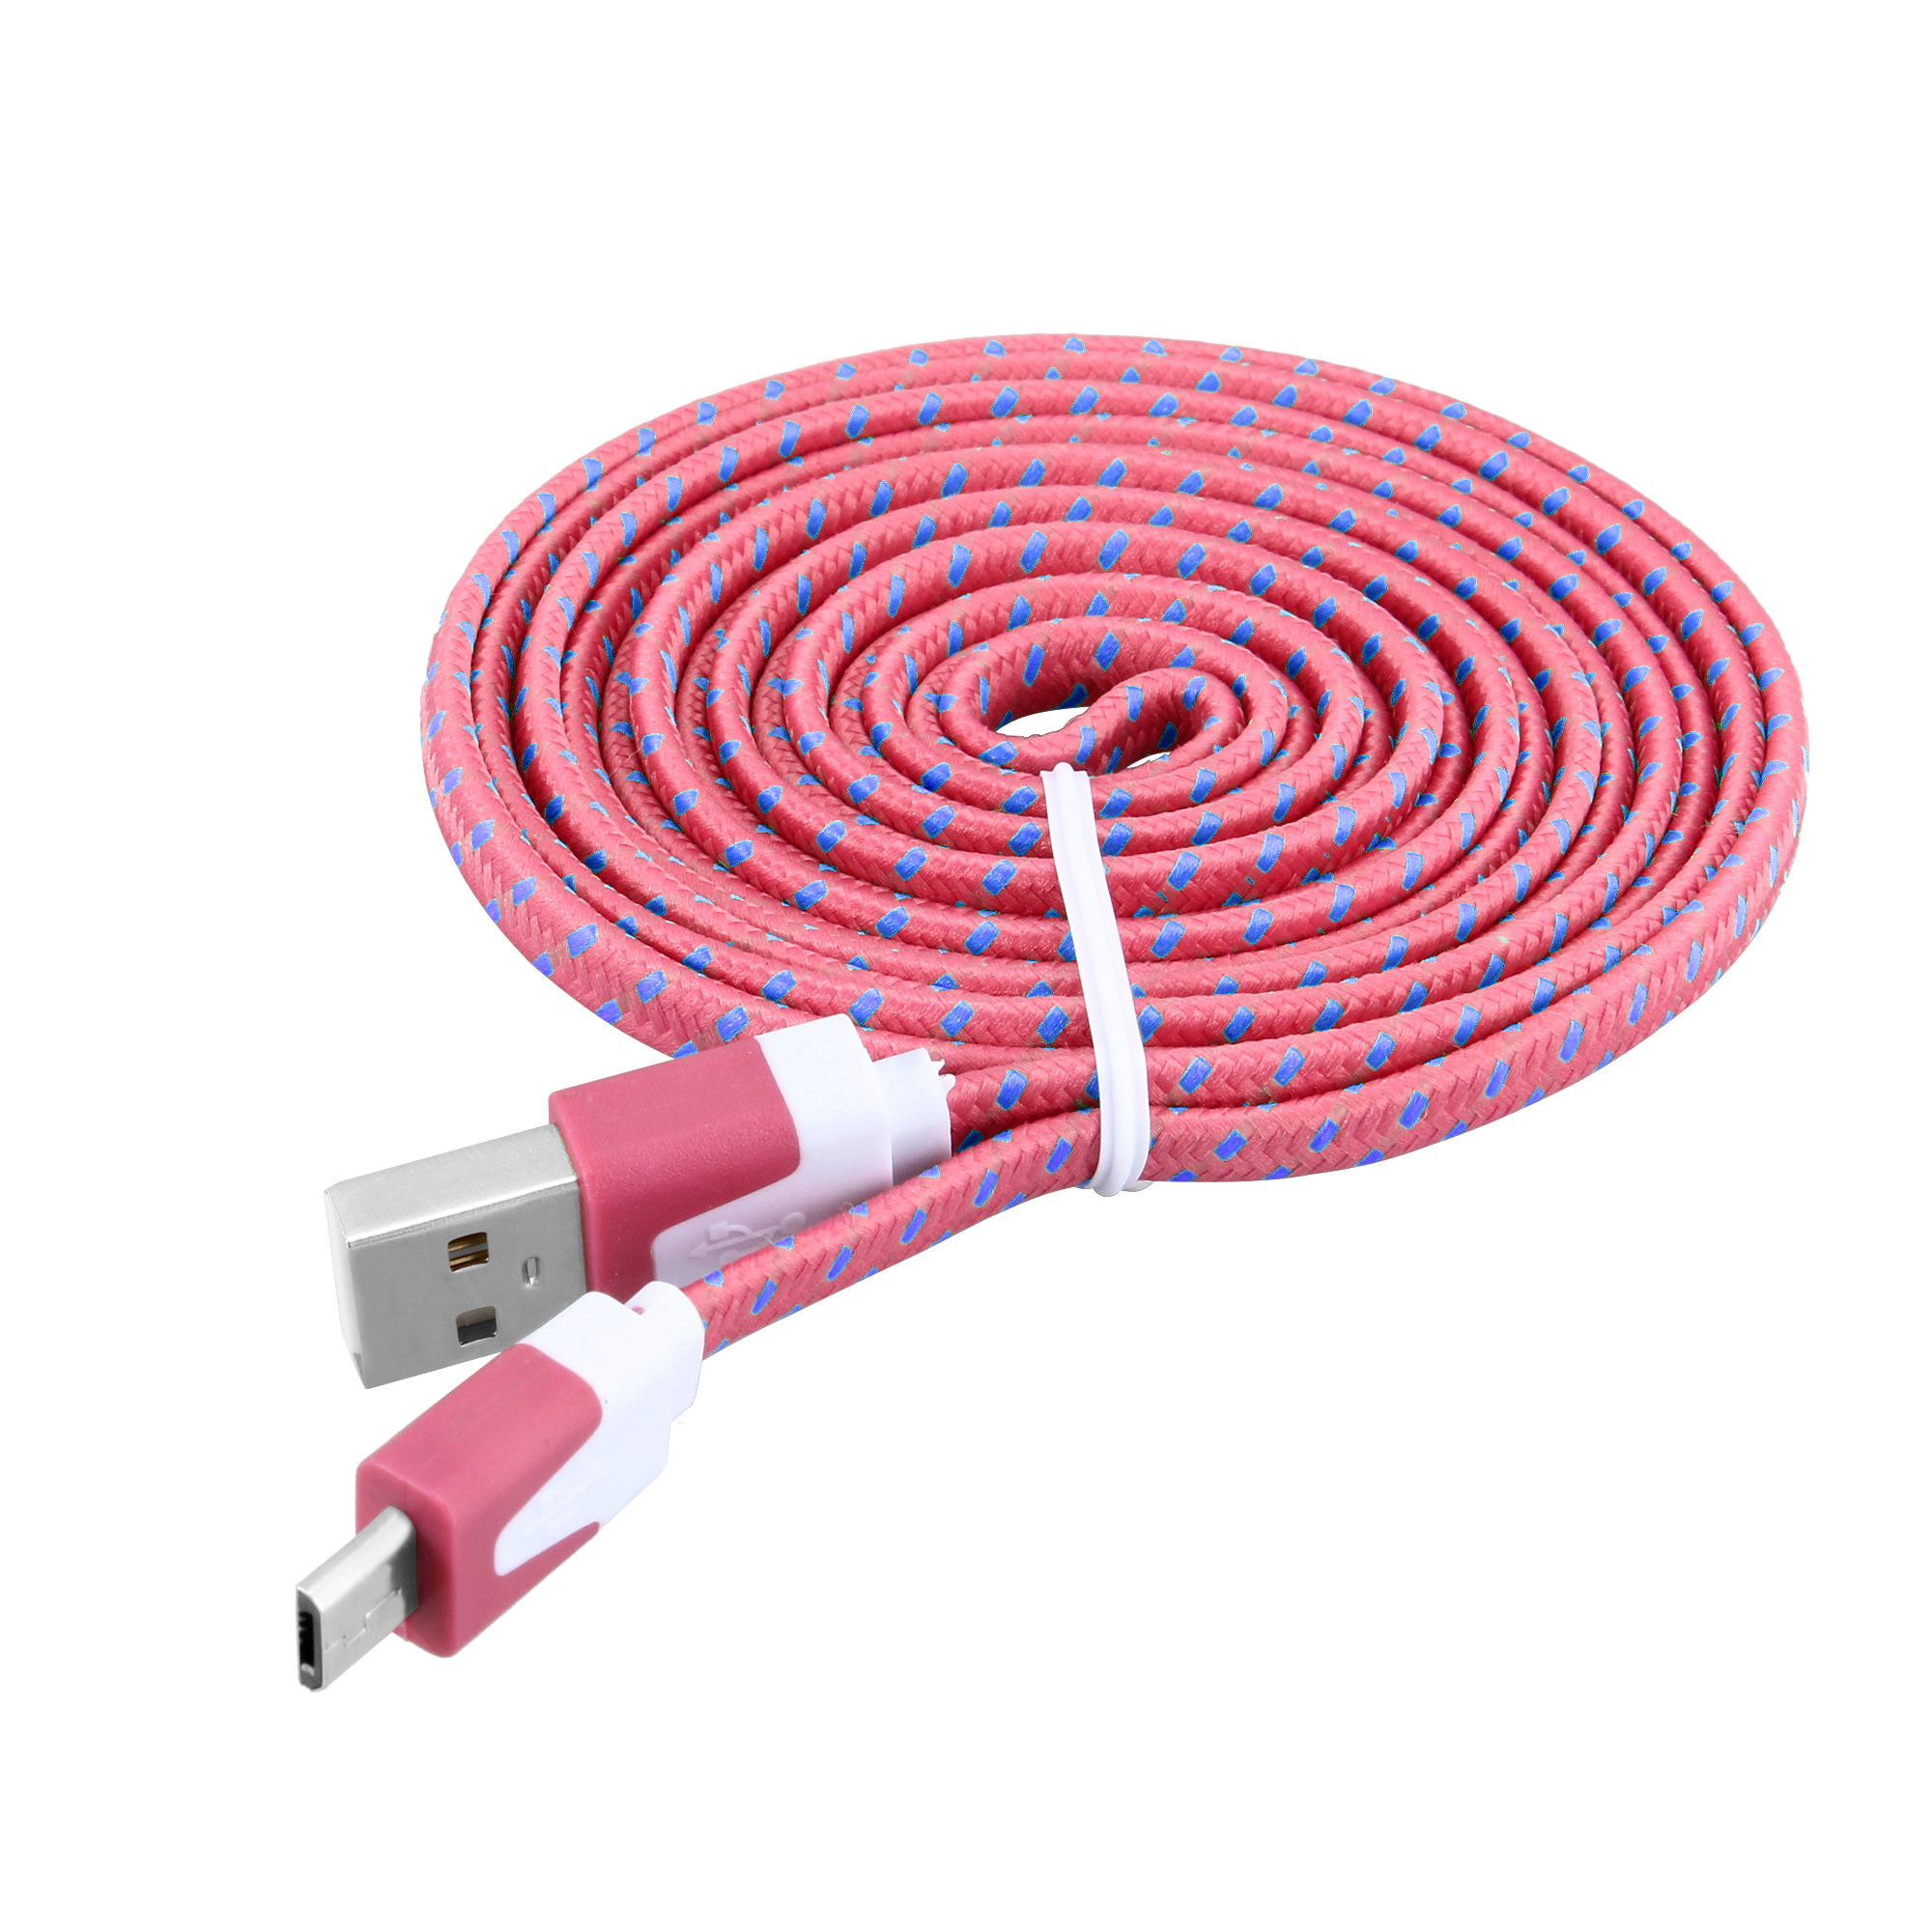 2m Weave Braid USB Data Sync Charging Cable for Samsung Android Phones - Pink